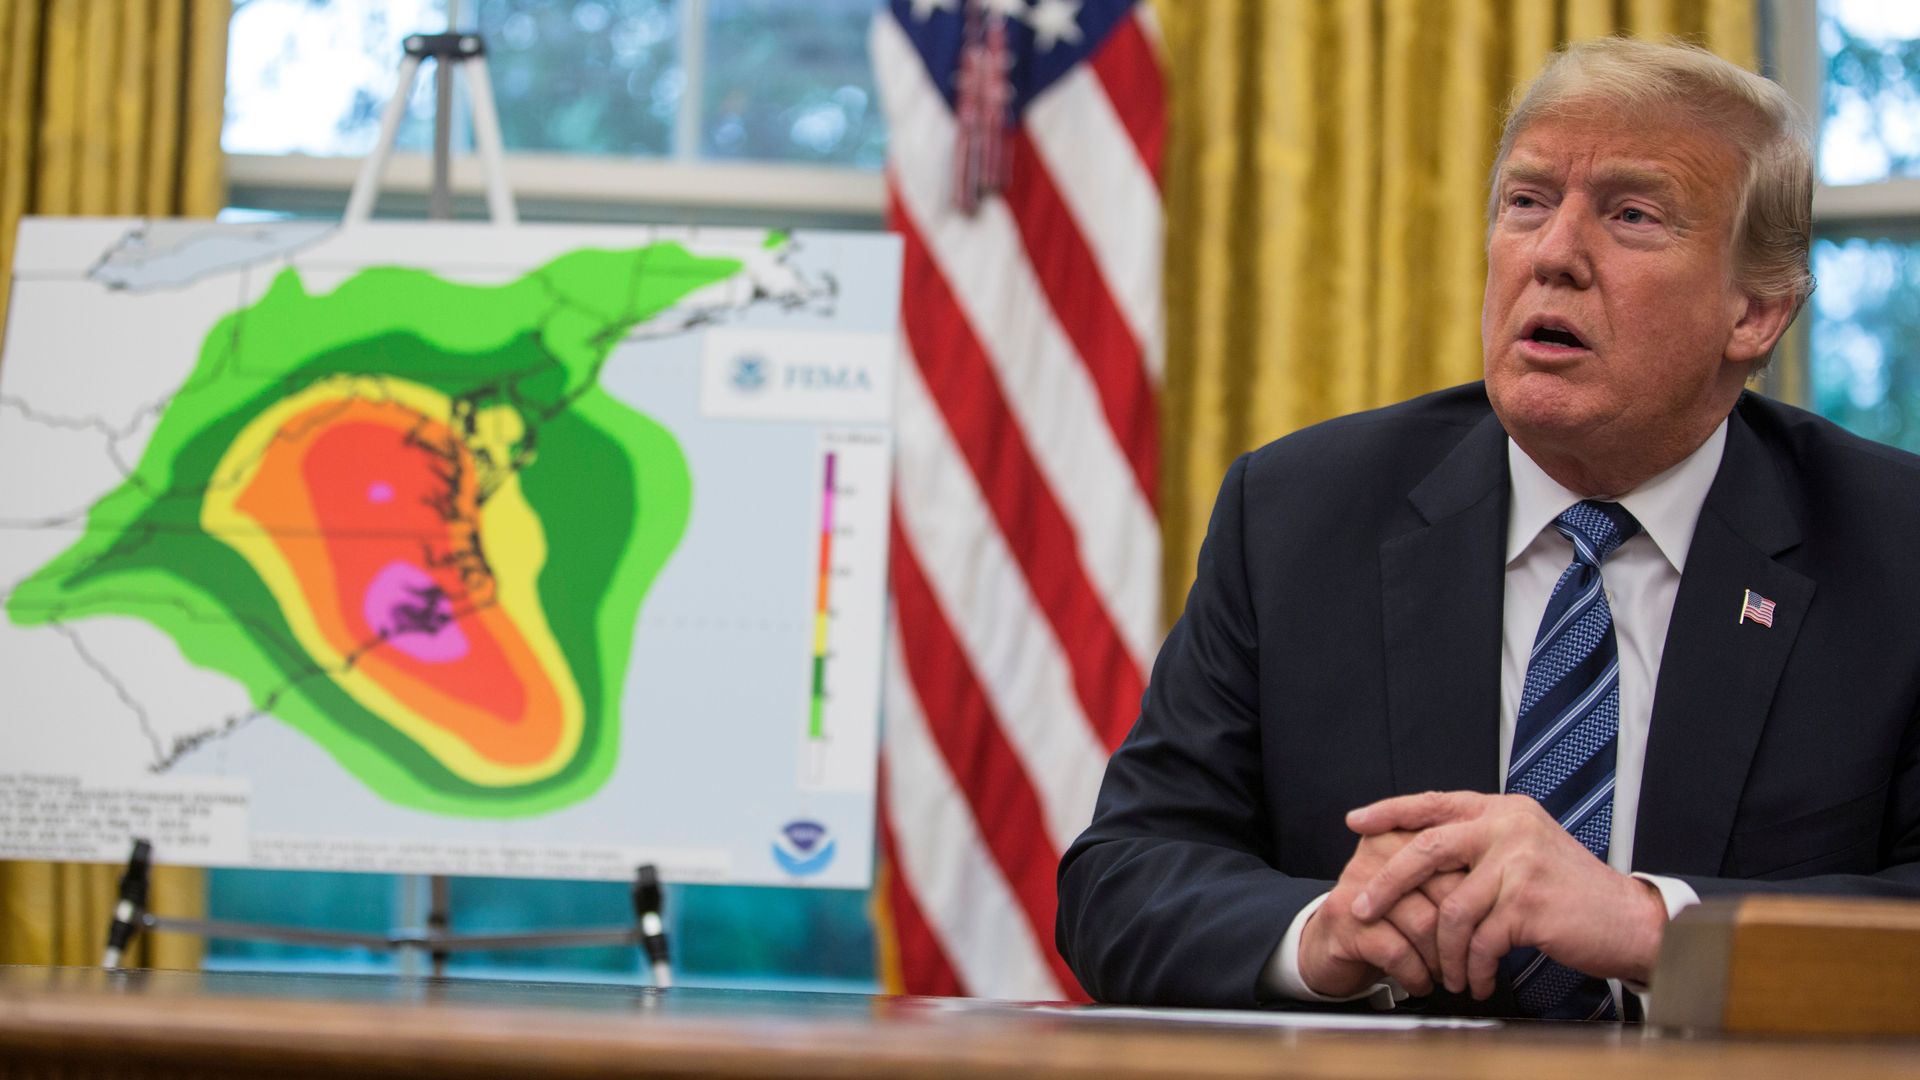 President Donald Trump at a briefing on Hurricane Florence in the Oval Office Tuesday. Photo: Zach Gibson /AFP/Getty Images